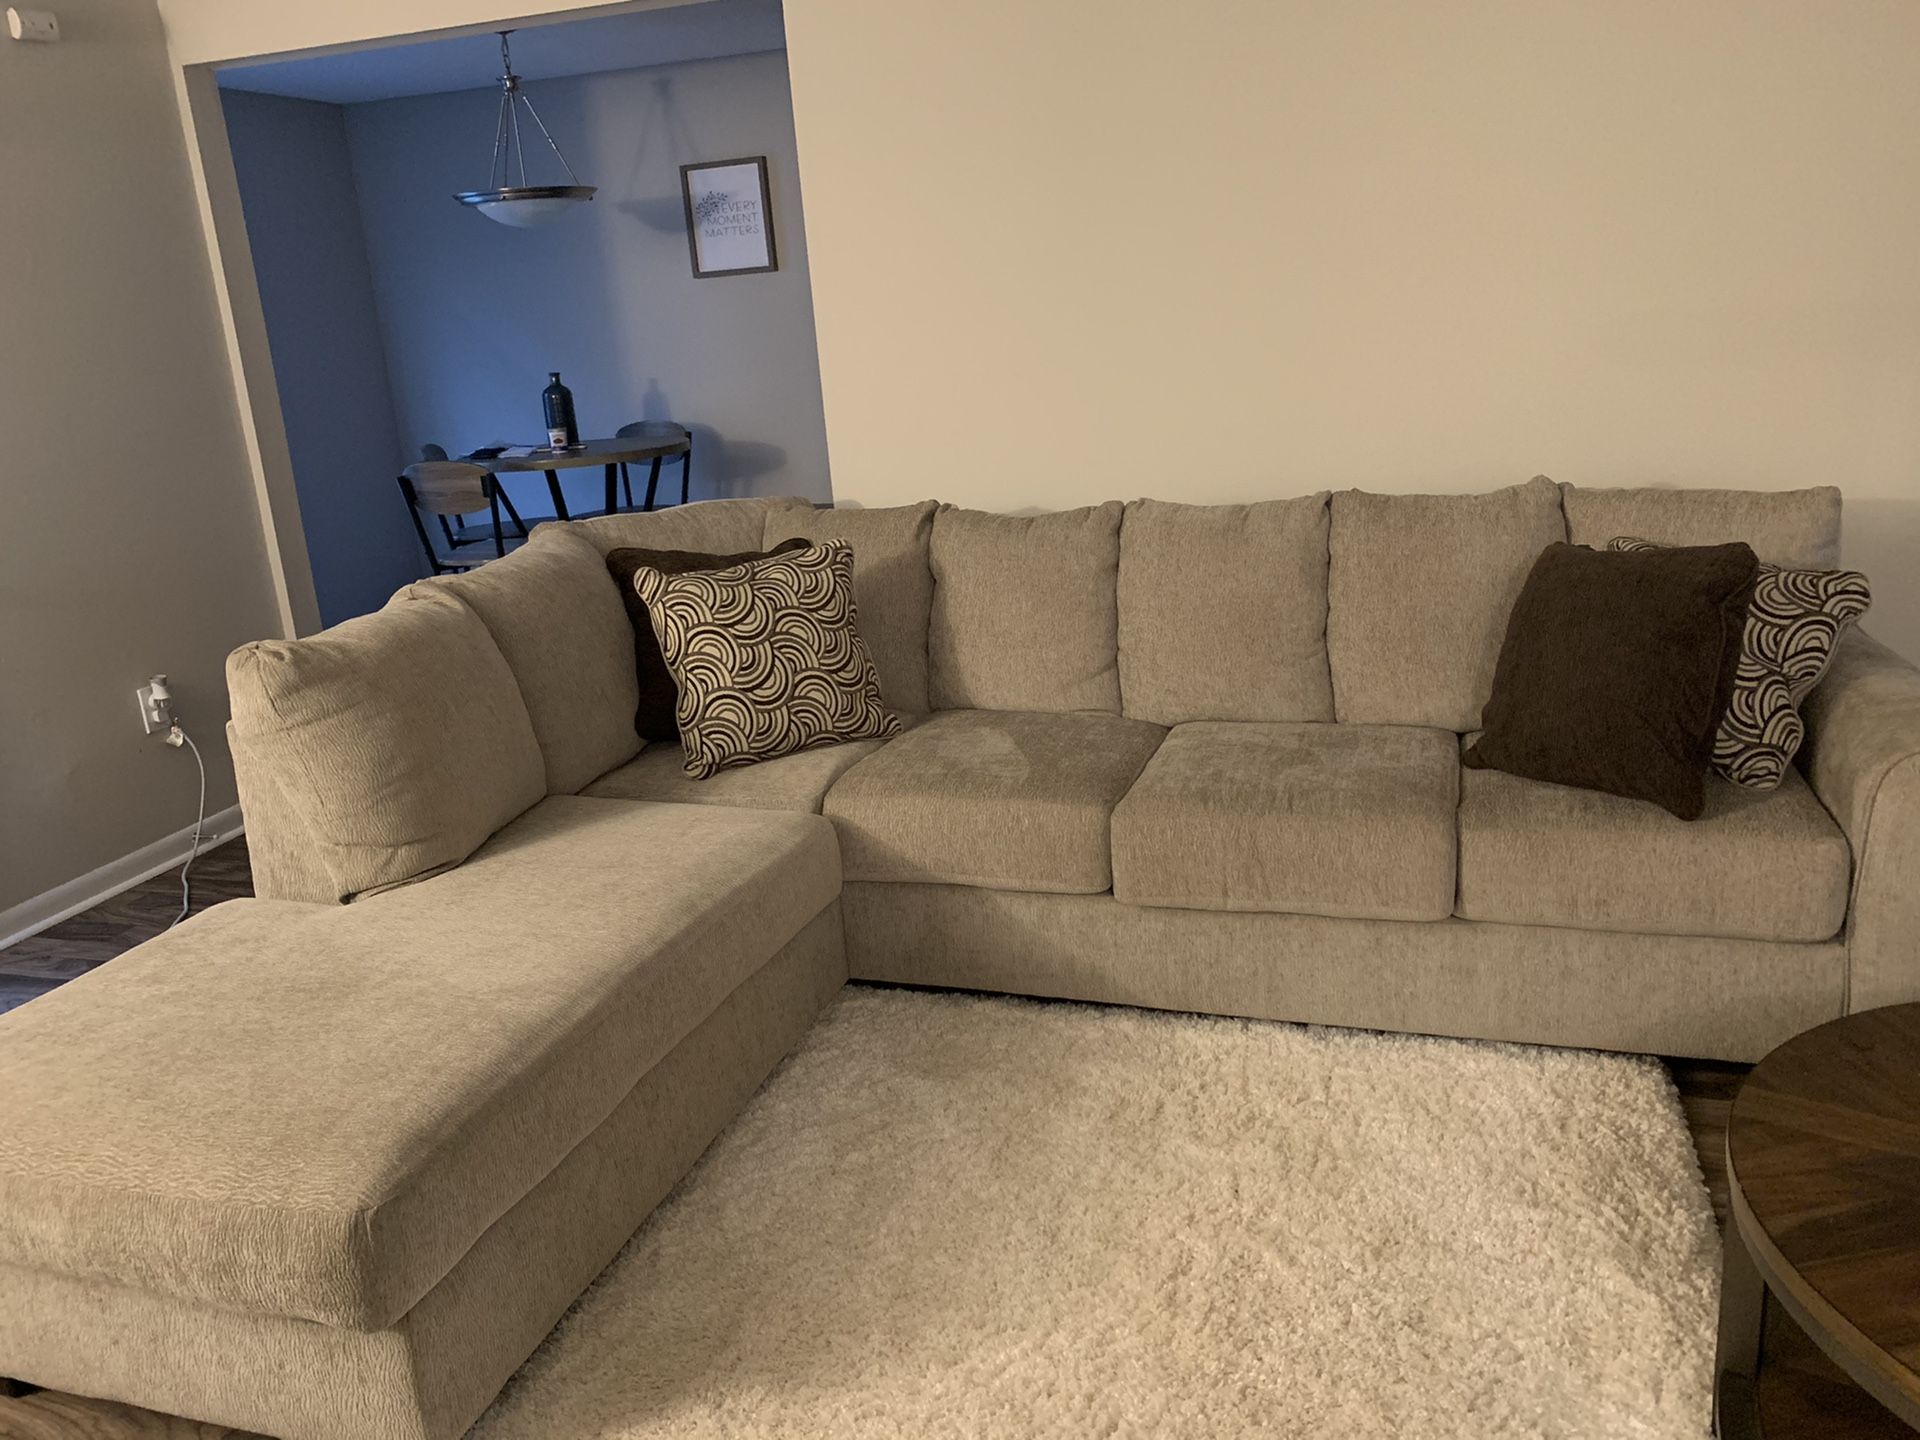 Light colored sectional. Fairly new, purchased in September